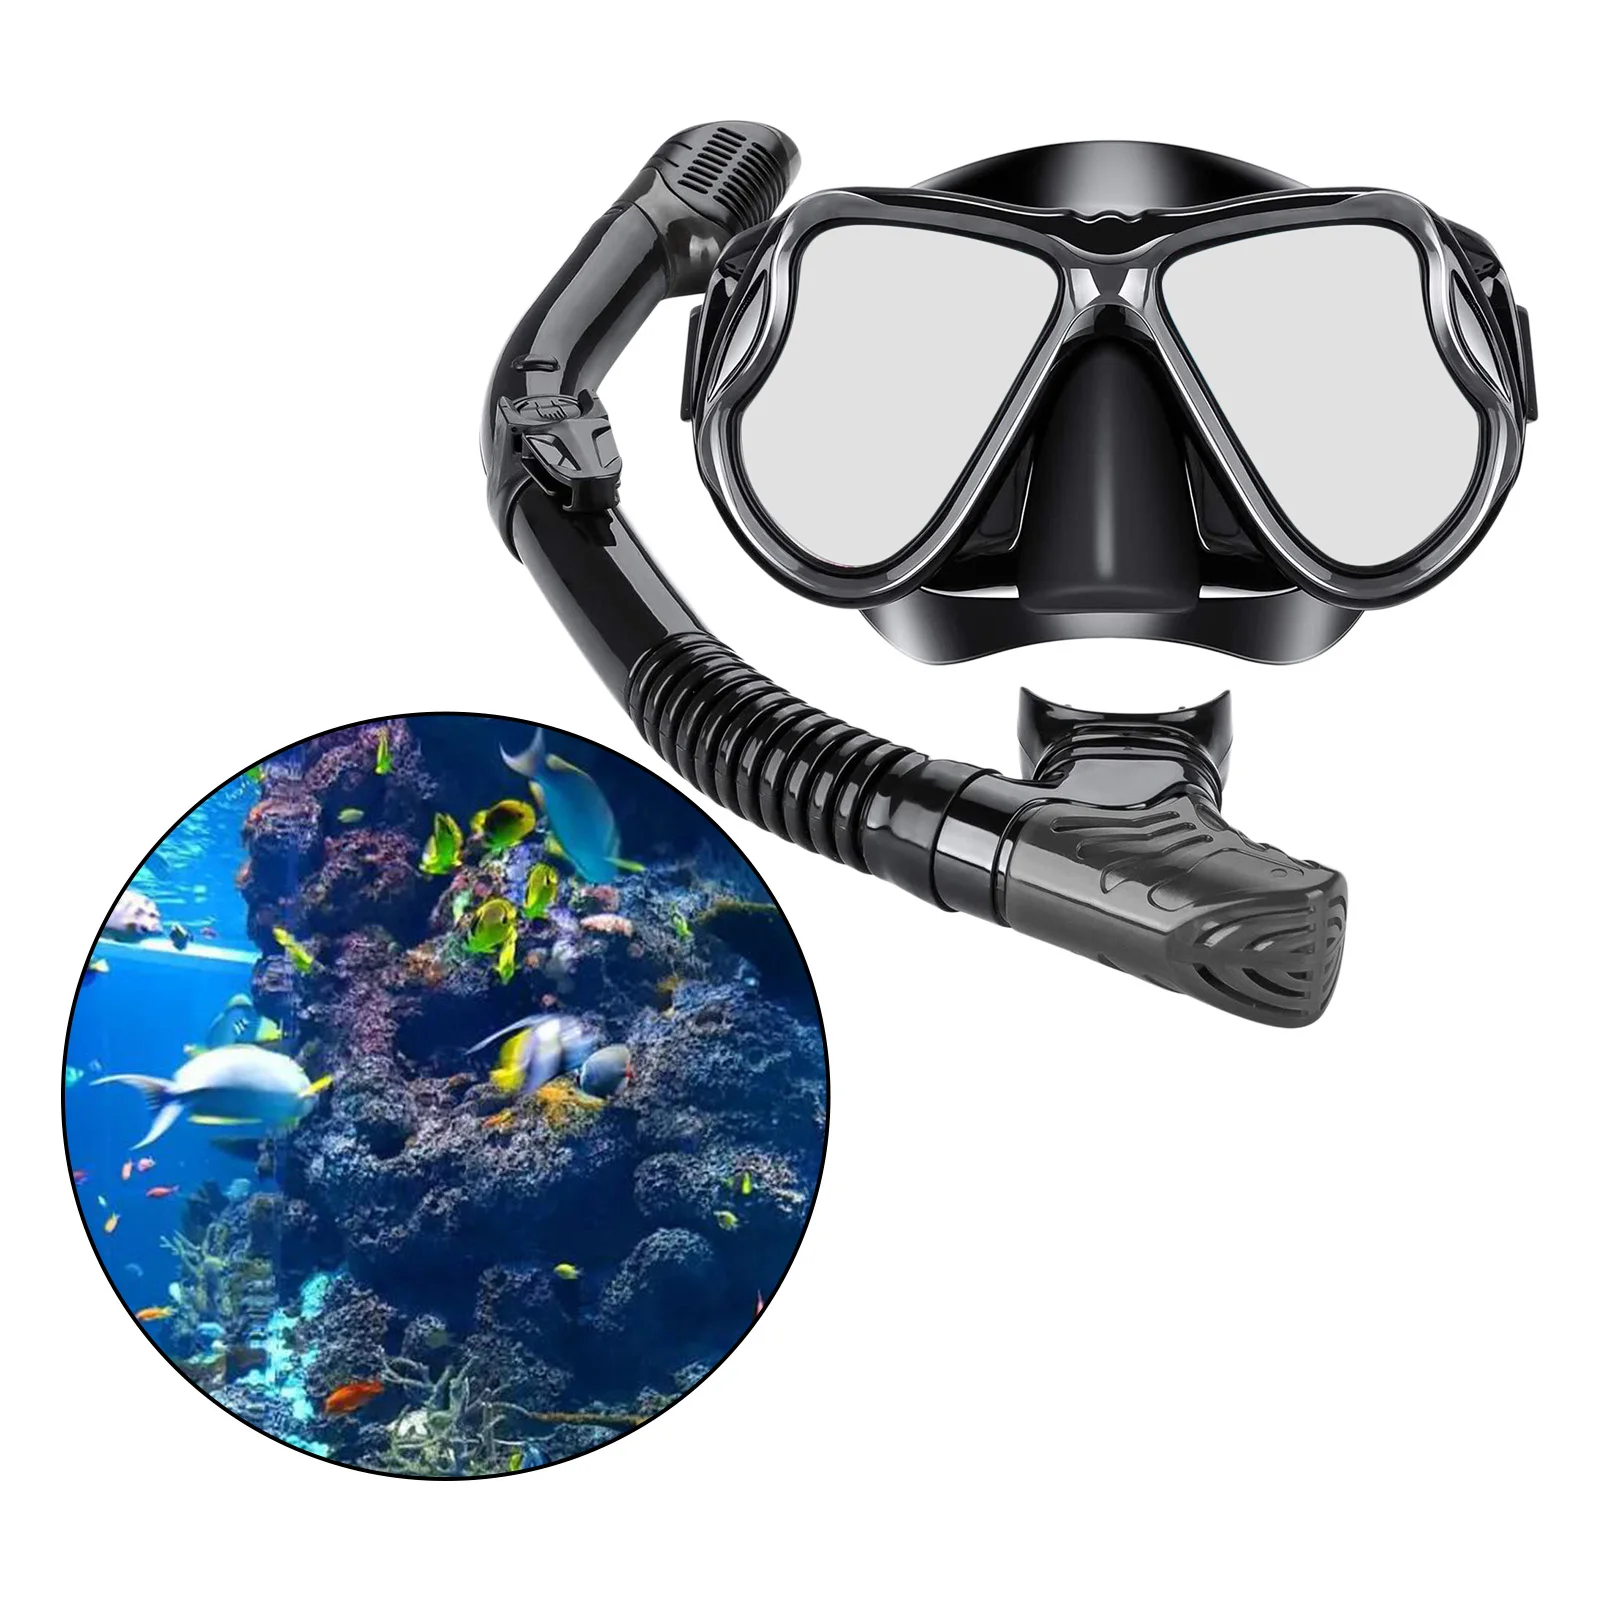 Snorkeling Scuba Set Anti-Fog Diving Mask and Freediving Snorkel for Adults 